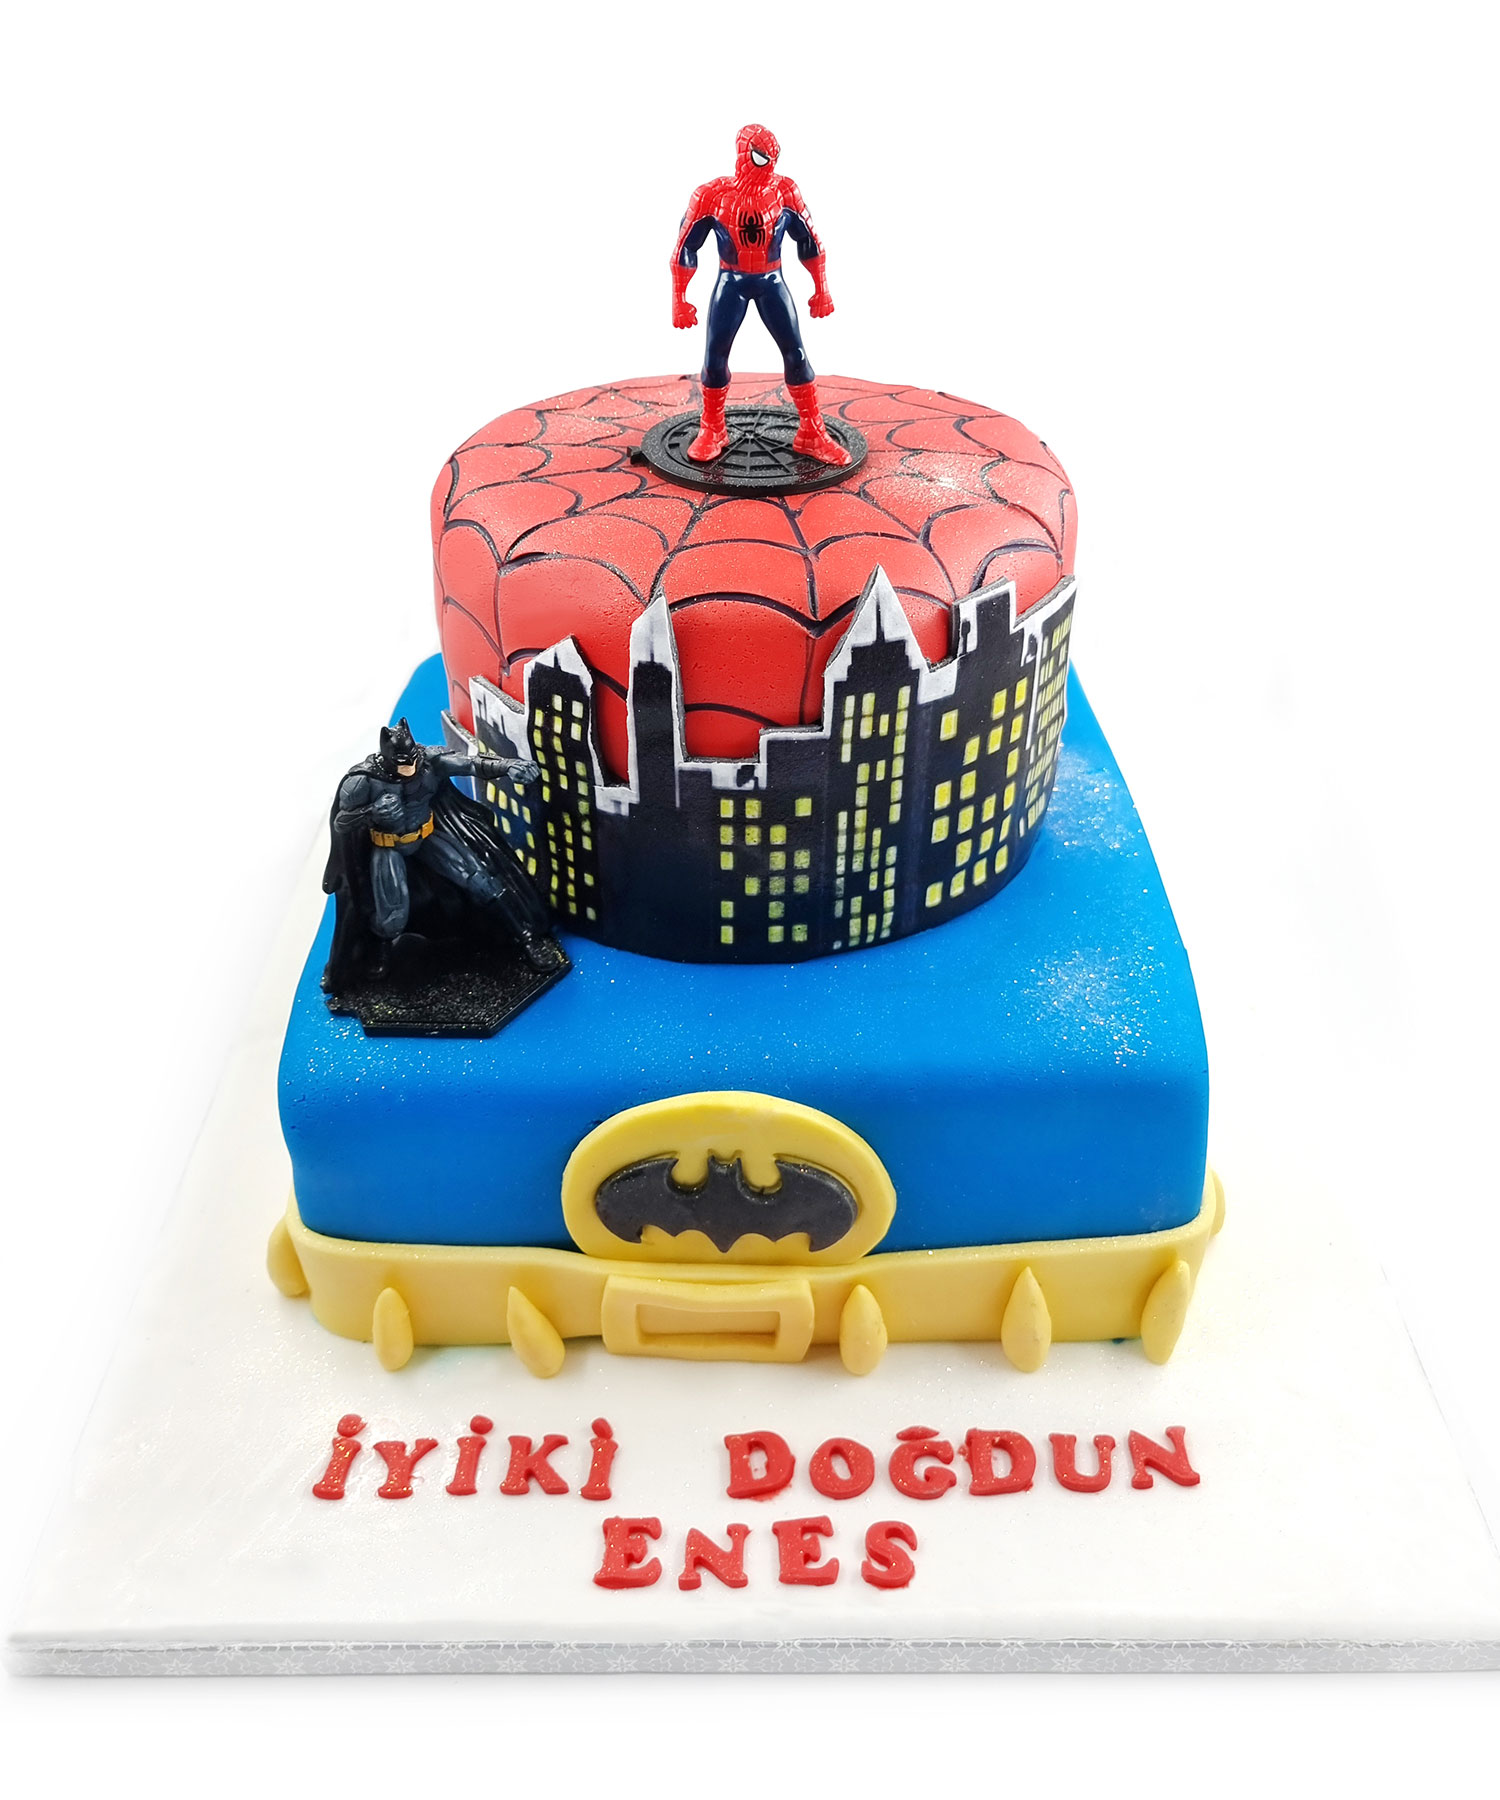 Cakes by Sevil — Hand cut modeling chocolate Batman and Spiderman...